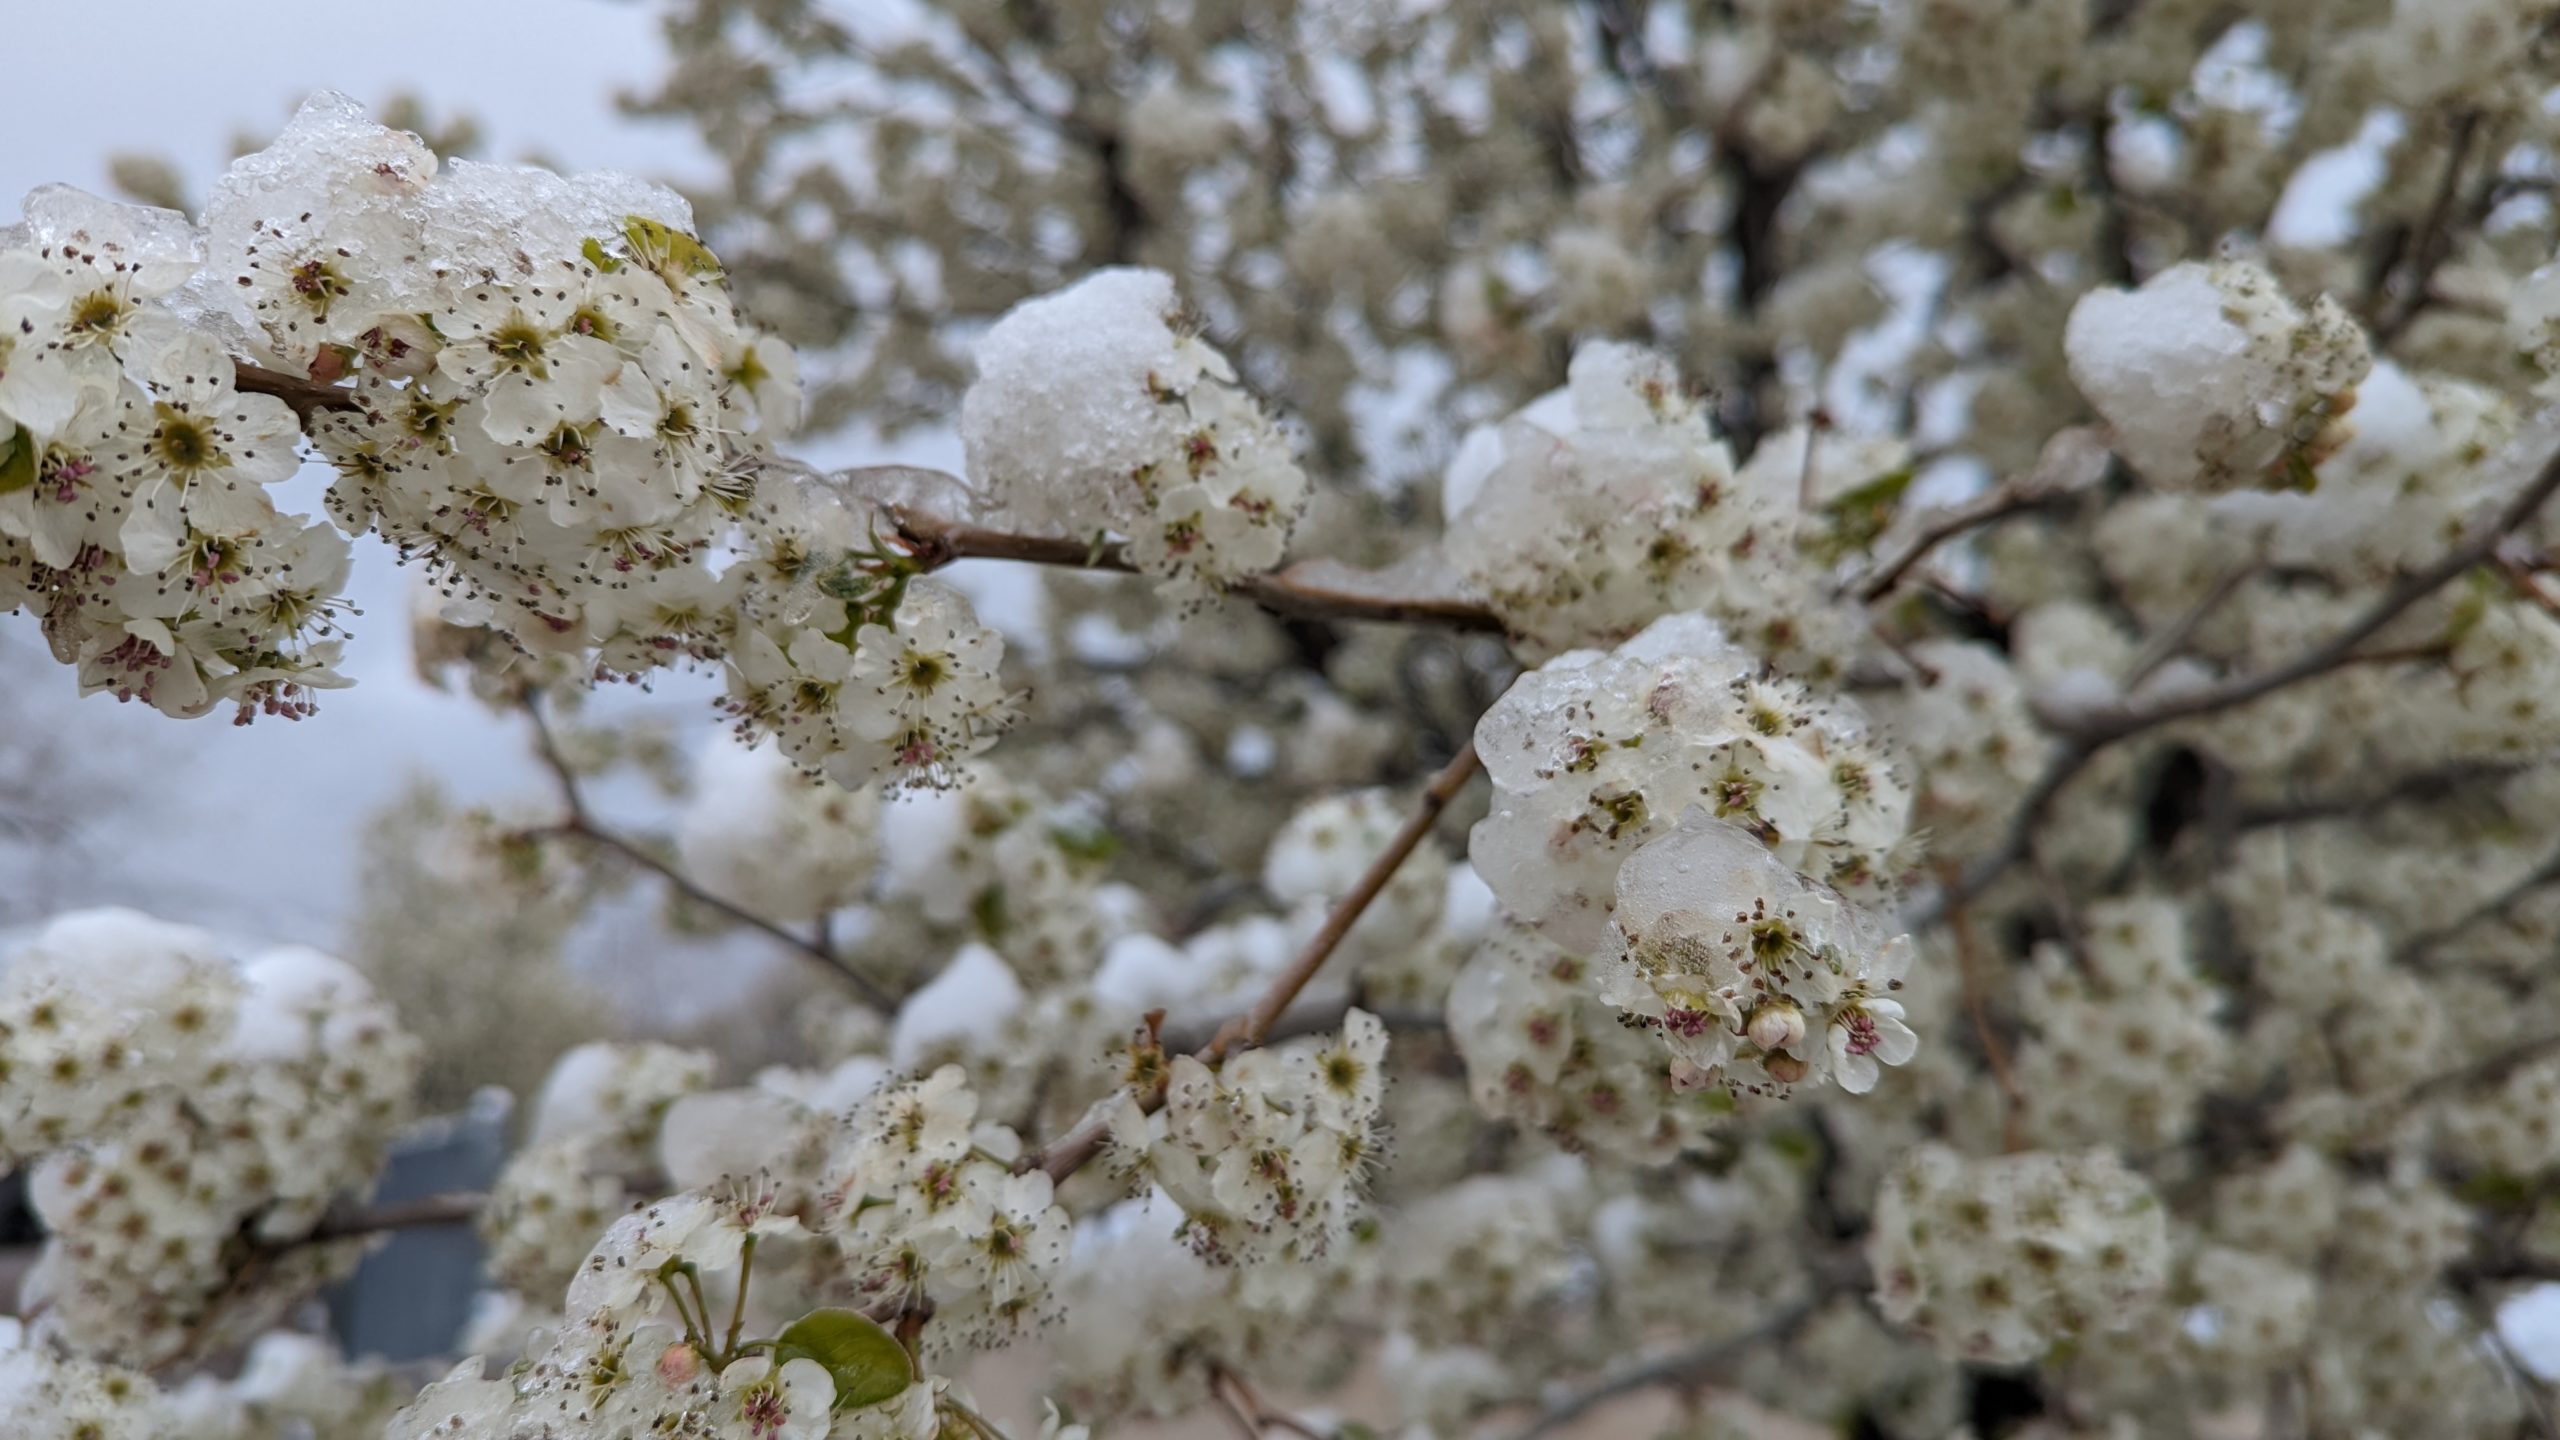 Winter-storm may impact fruit tree production this summer...